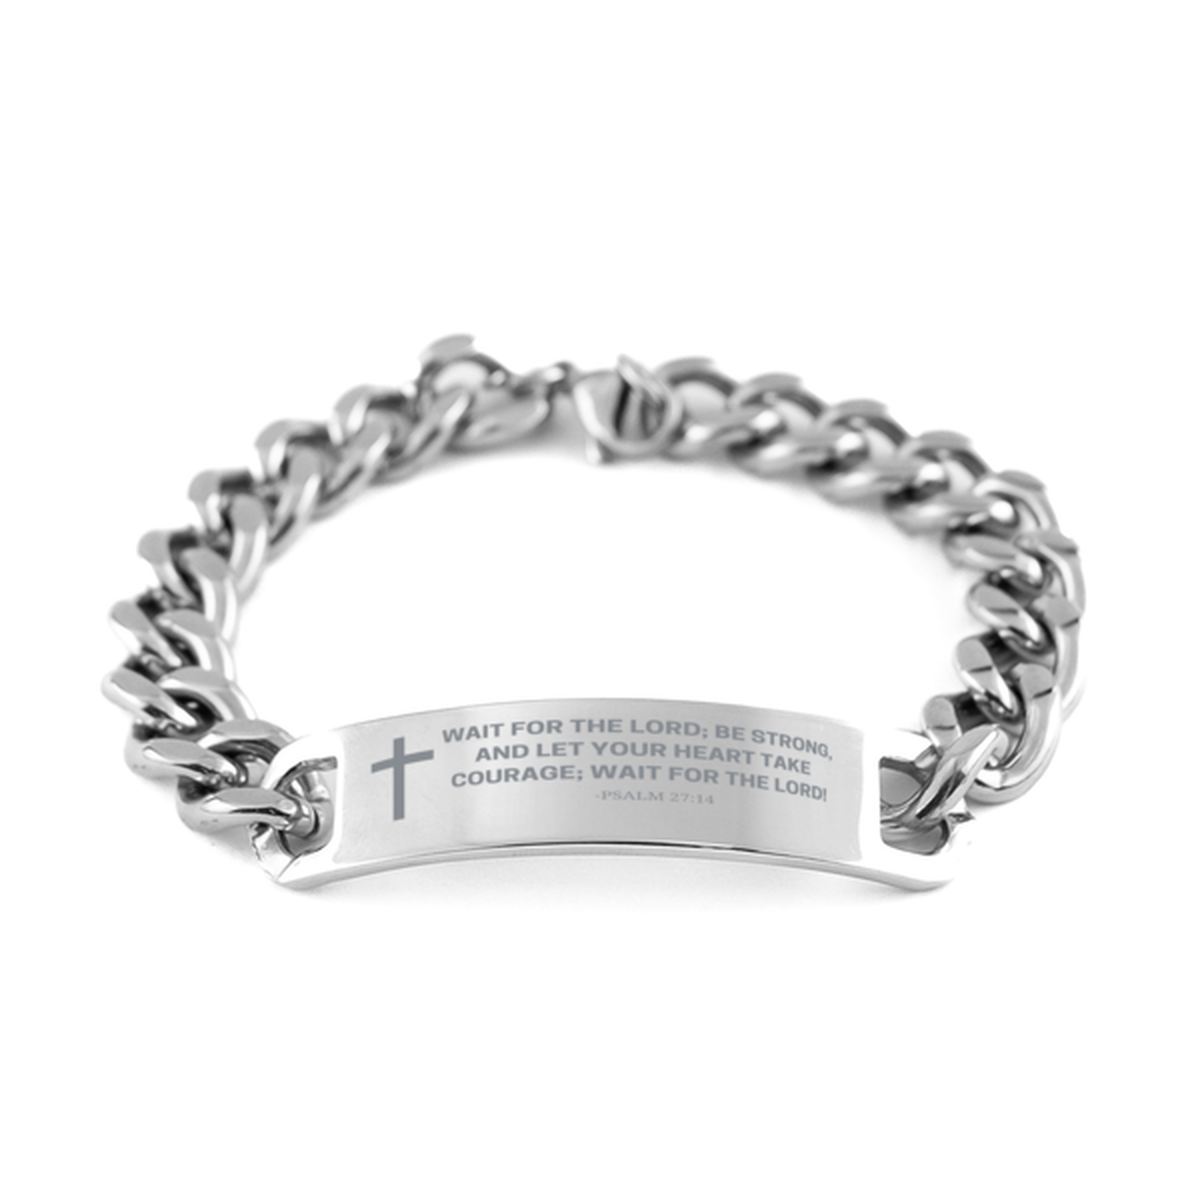 Baptism Gifts For Teenage Boys Girls, Christian Bible Verse Cuban Chain Bracelet, Wait for the Lord, Catholic Confirmation Gifts for Son, Godson, Grandson, Nephew